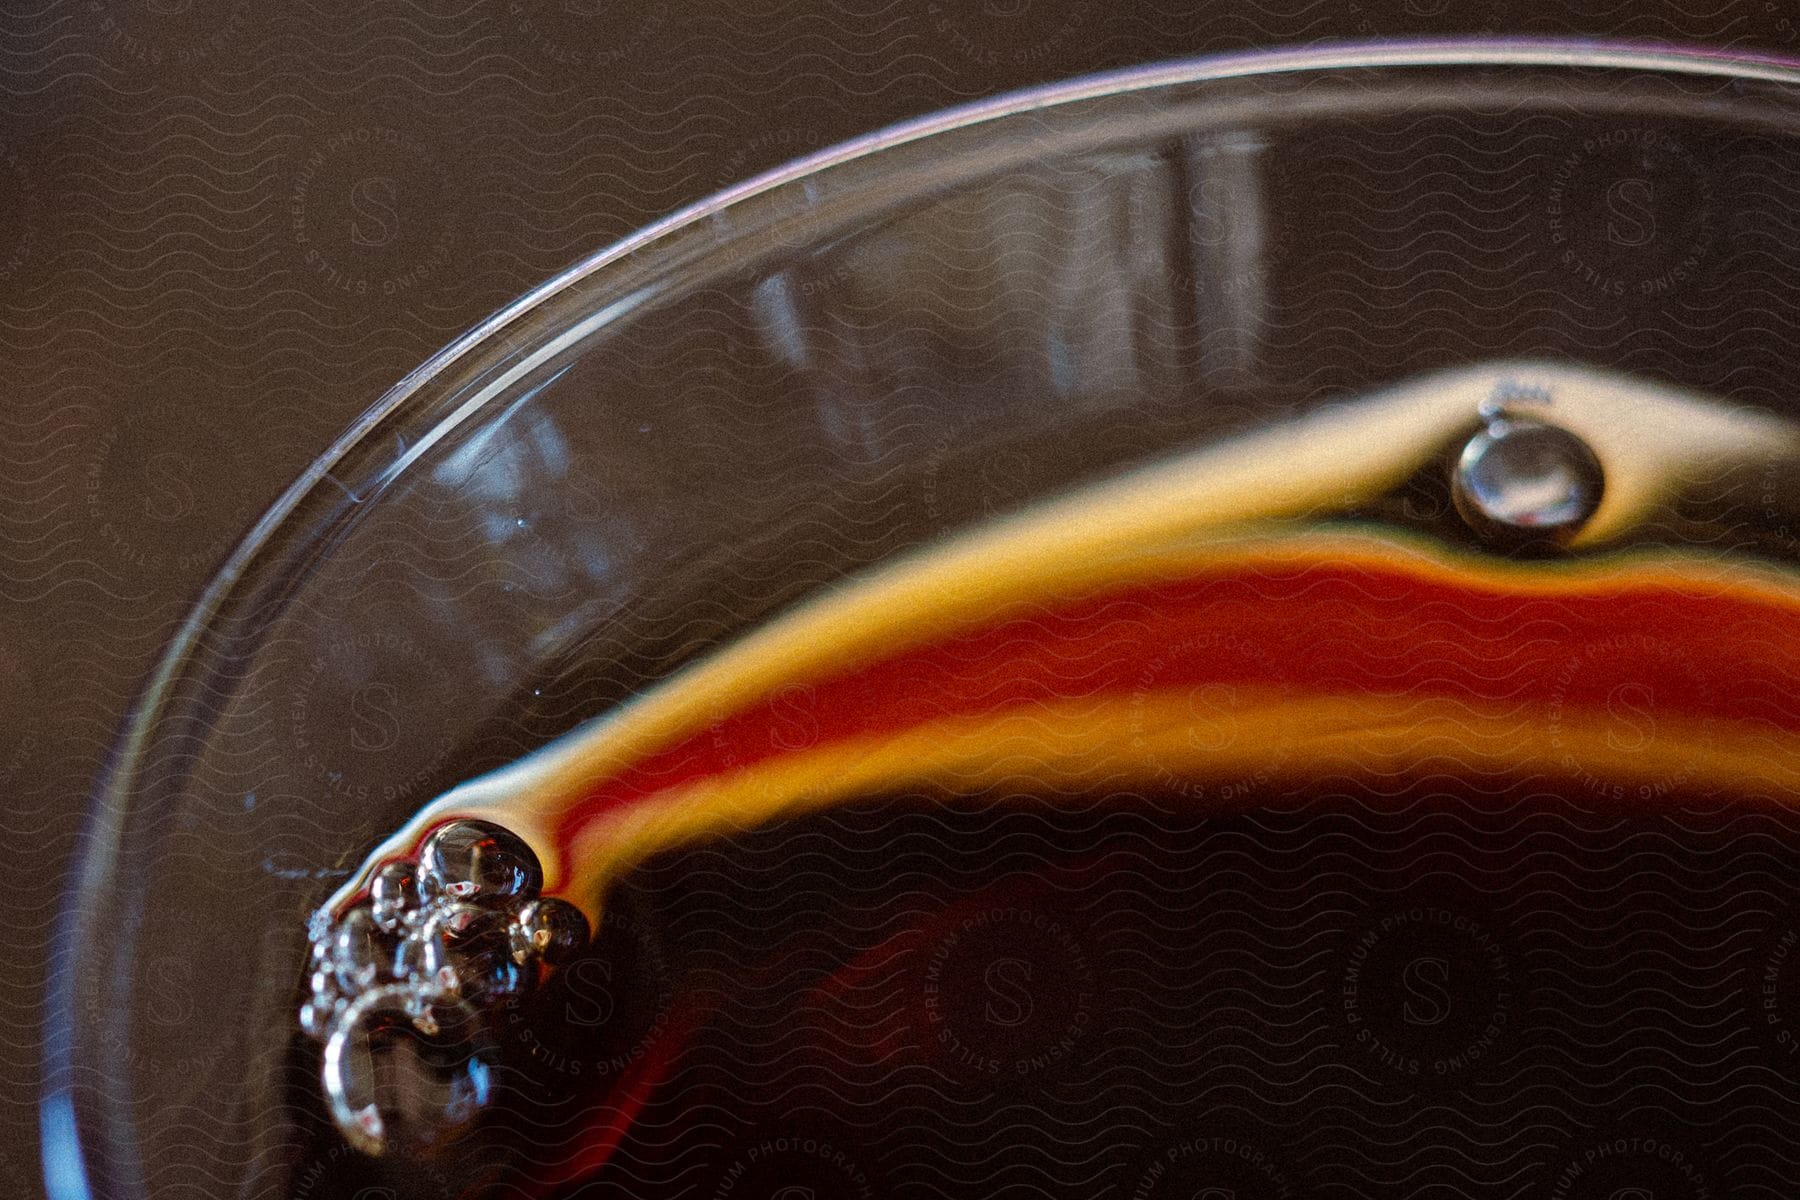 A close up of a black beverage in a clear glass cup with bubbles on the surface